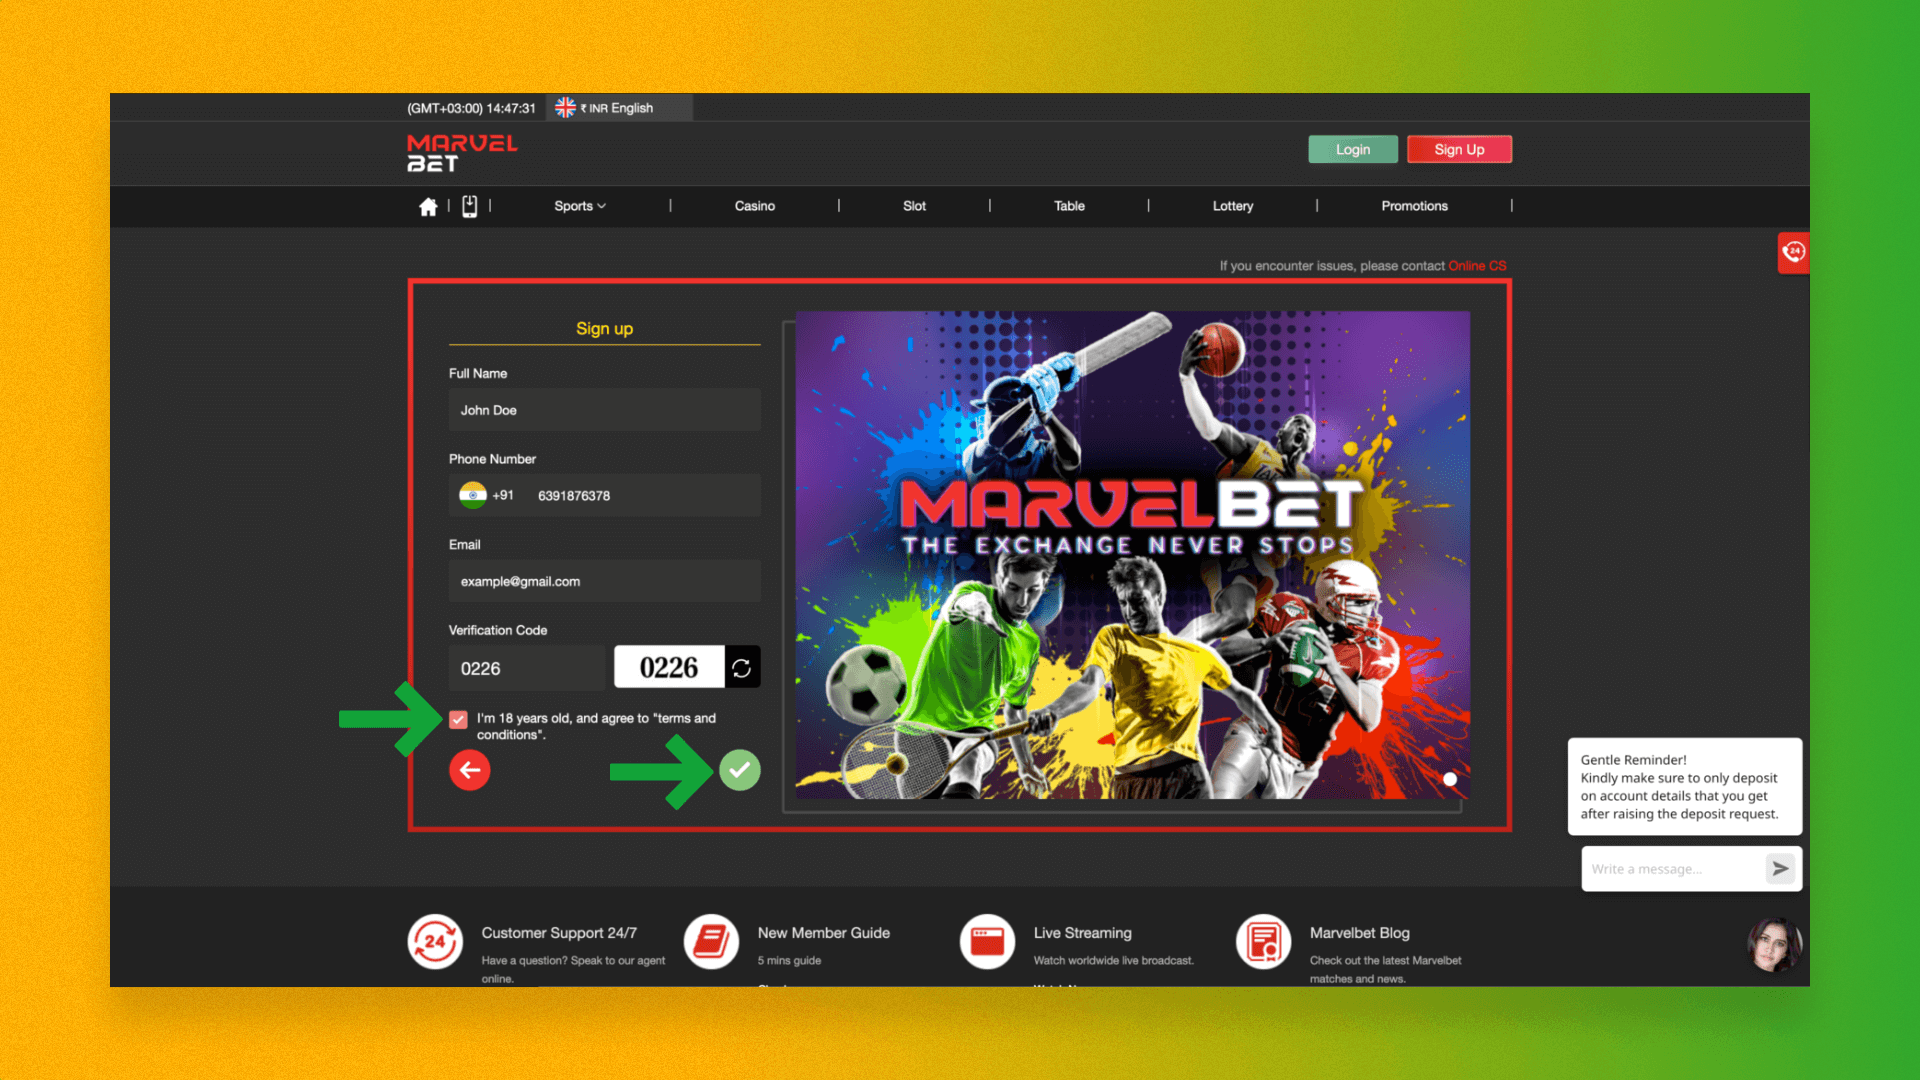 The registration process for a new Marvelbet client from India